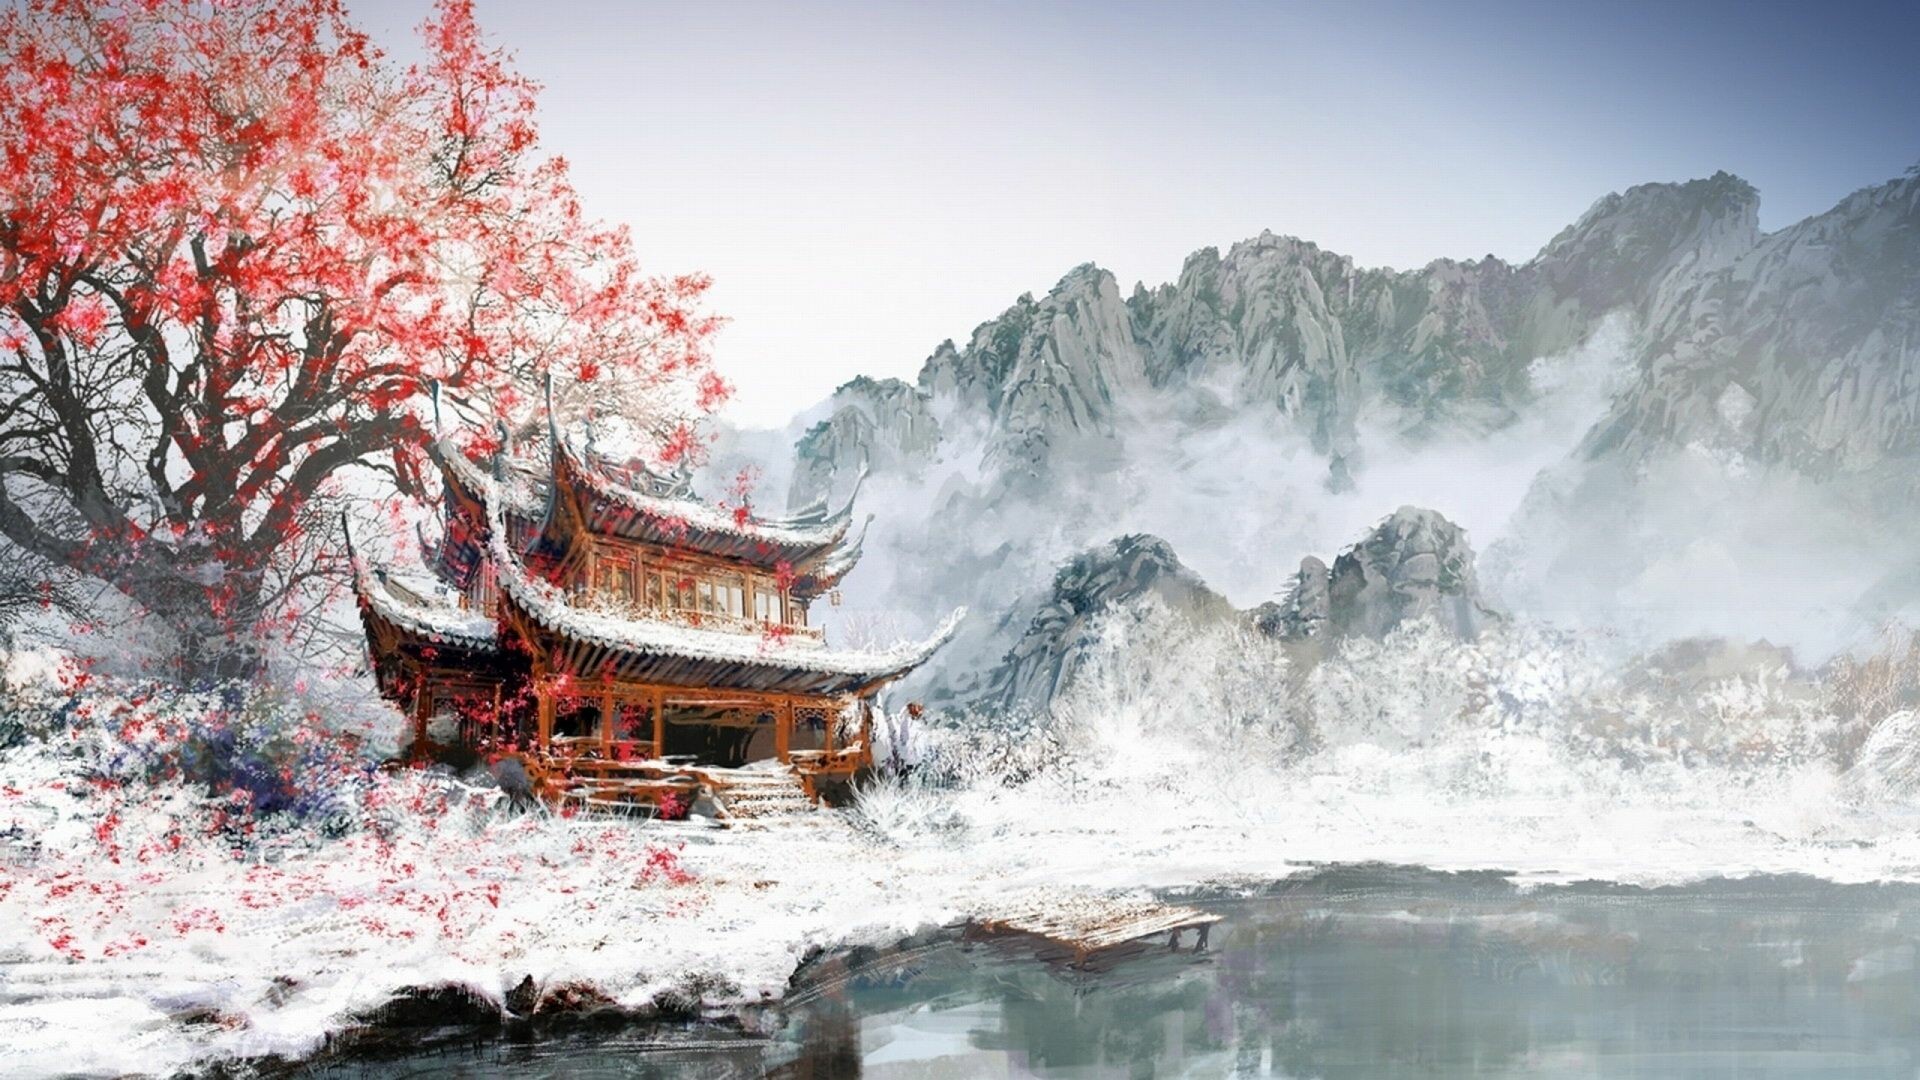 Japan Wallpaper: HD, 4K, 5K for PC and Mobile. Download free image for iPhone, Android